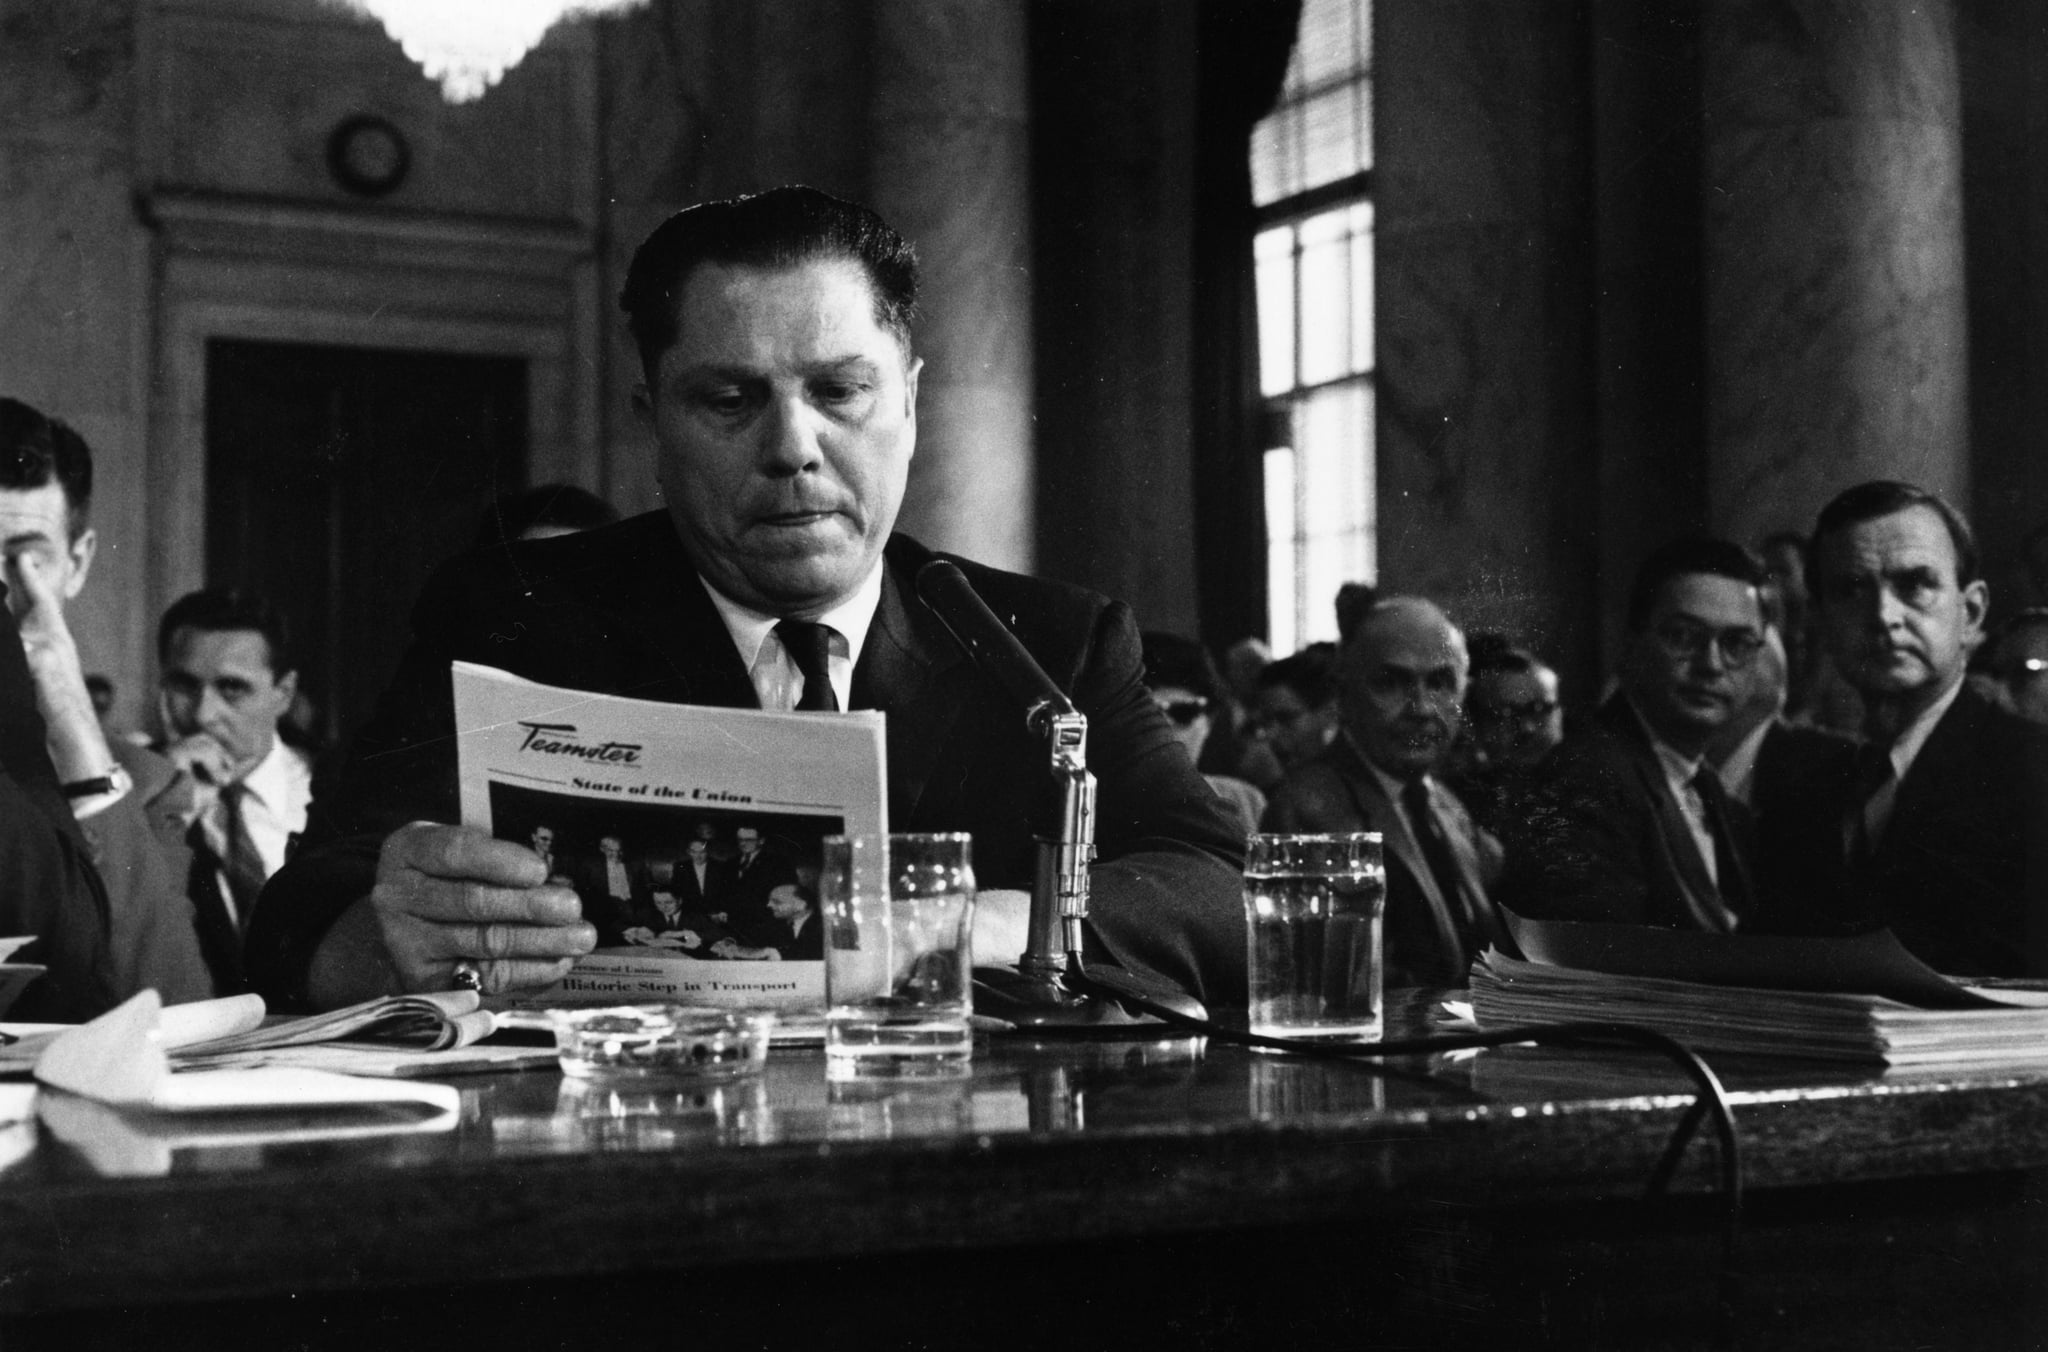 11th August 1958:  American labour leader Jimmy Hoffa (1913 - 1975), President of the Teamster's Union, testifying at a hearing into labor rackets. Rumoured to have mafia connections, Hoffa disappeared in 1975 and no body has ever been found.  (Photo by Keystone/Getty Images)